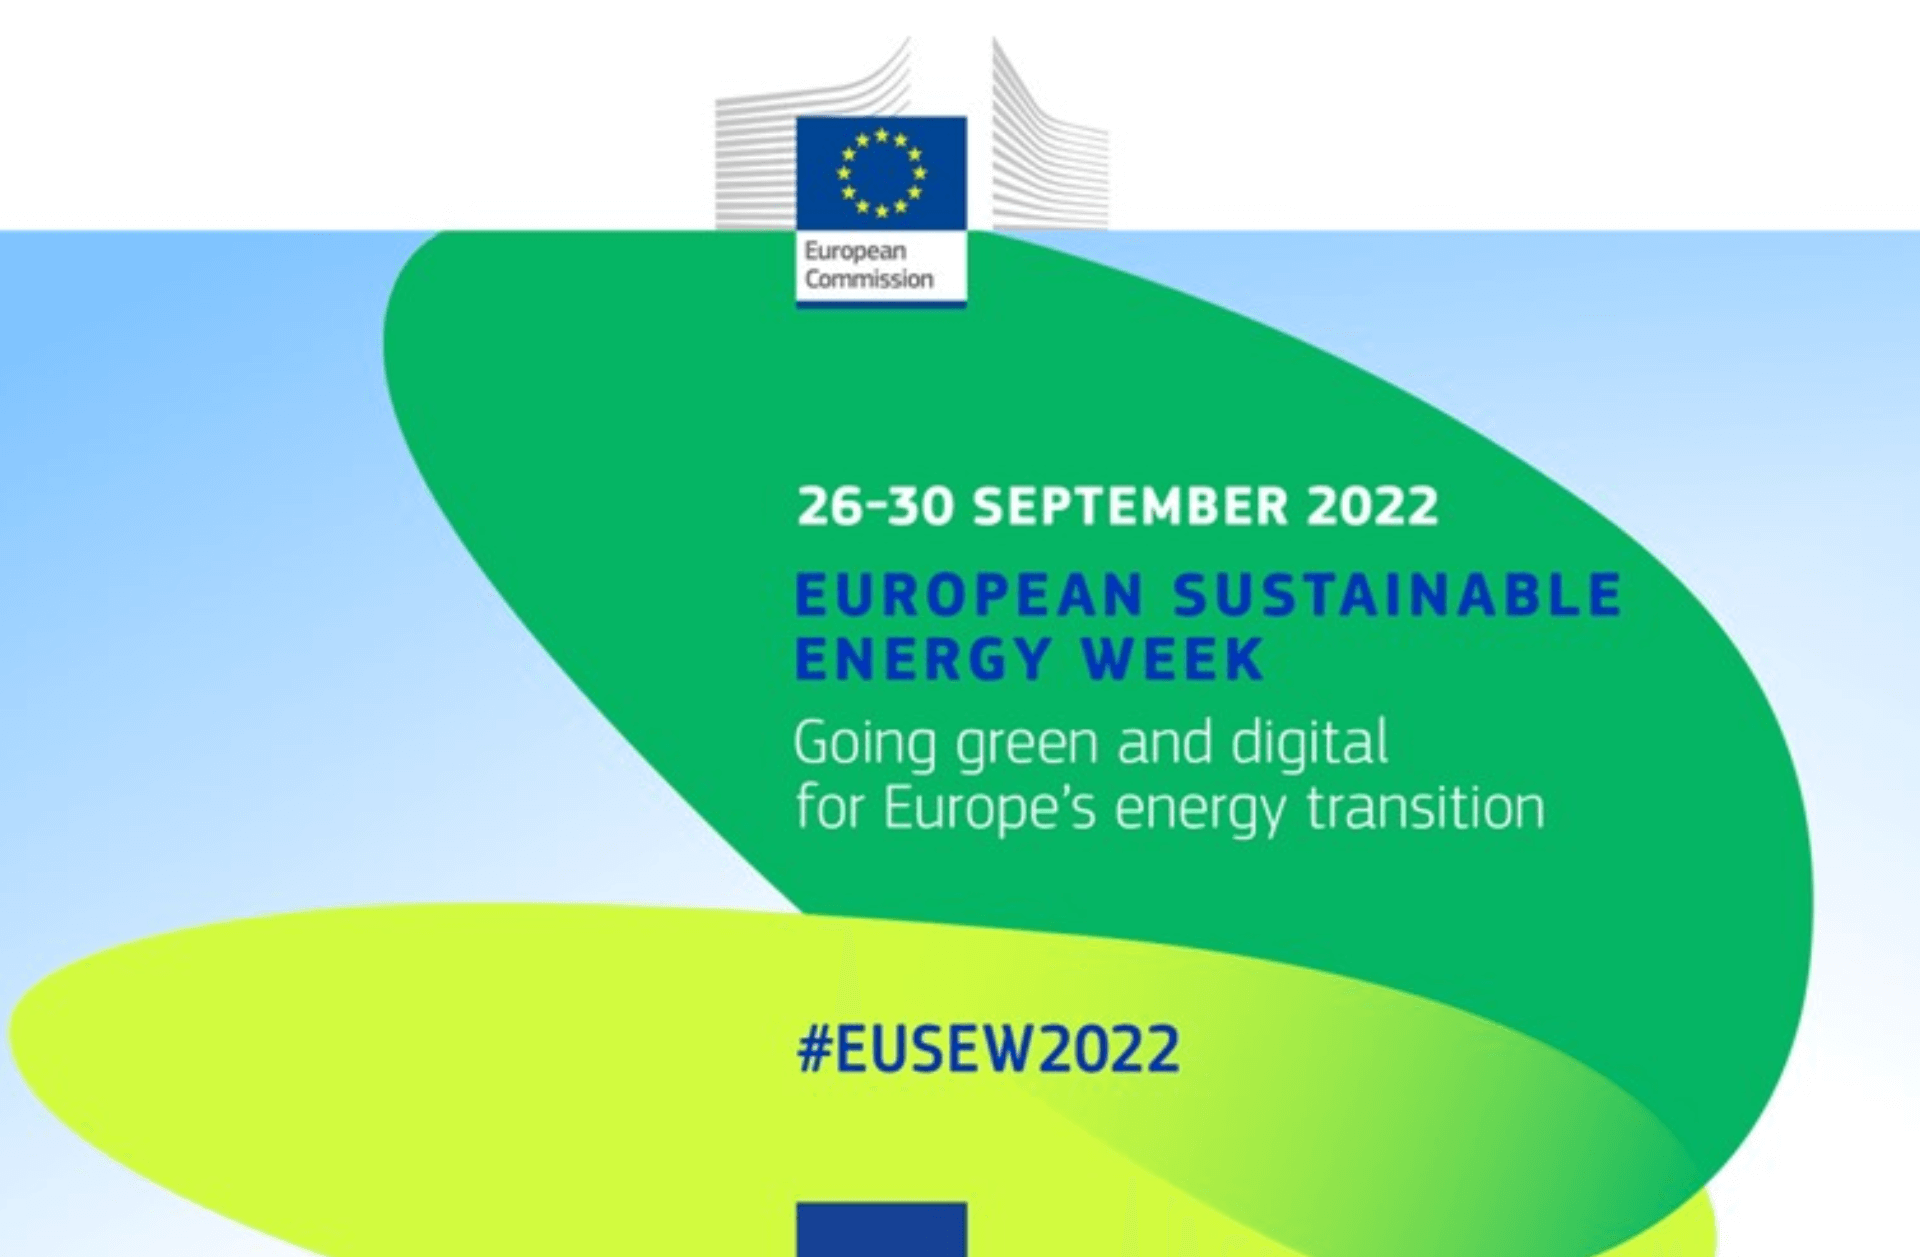 See you at #EUSEW2022: Join our policy session on 28 September